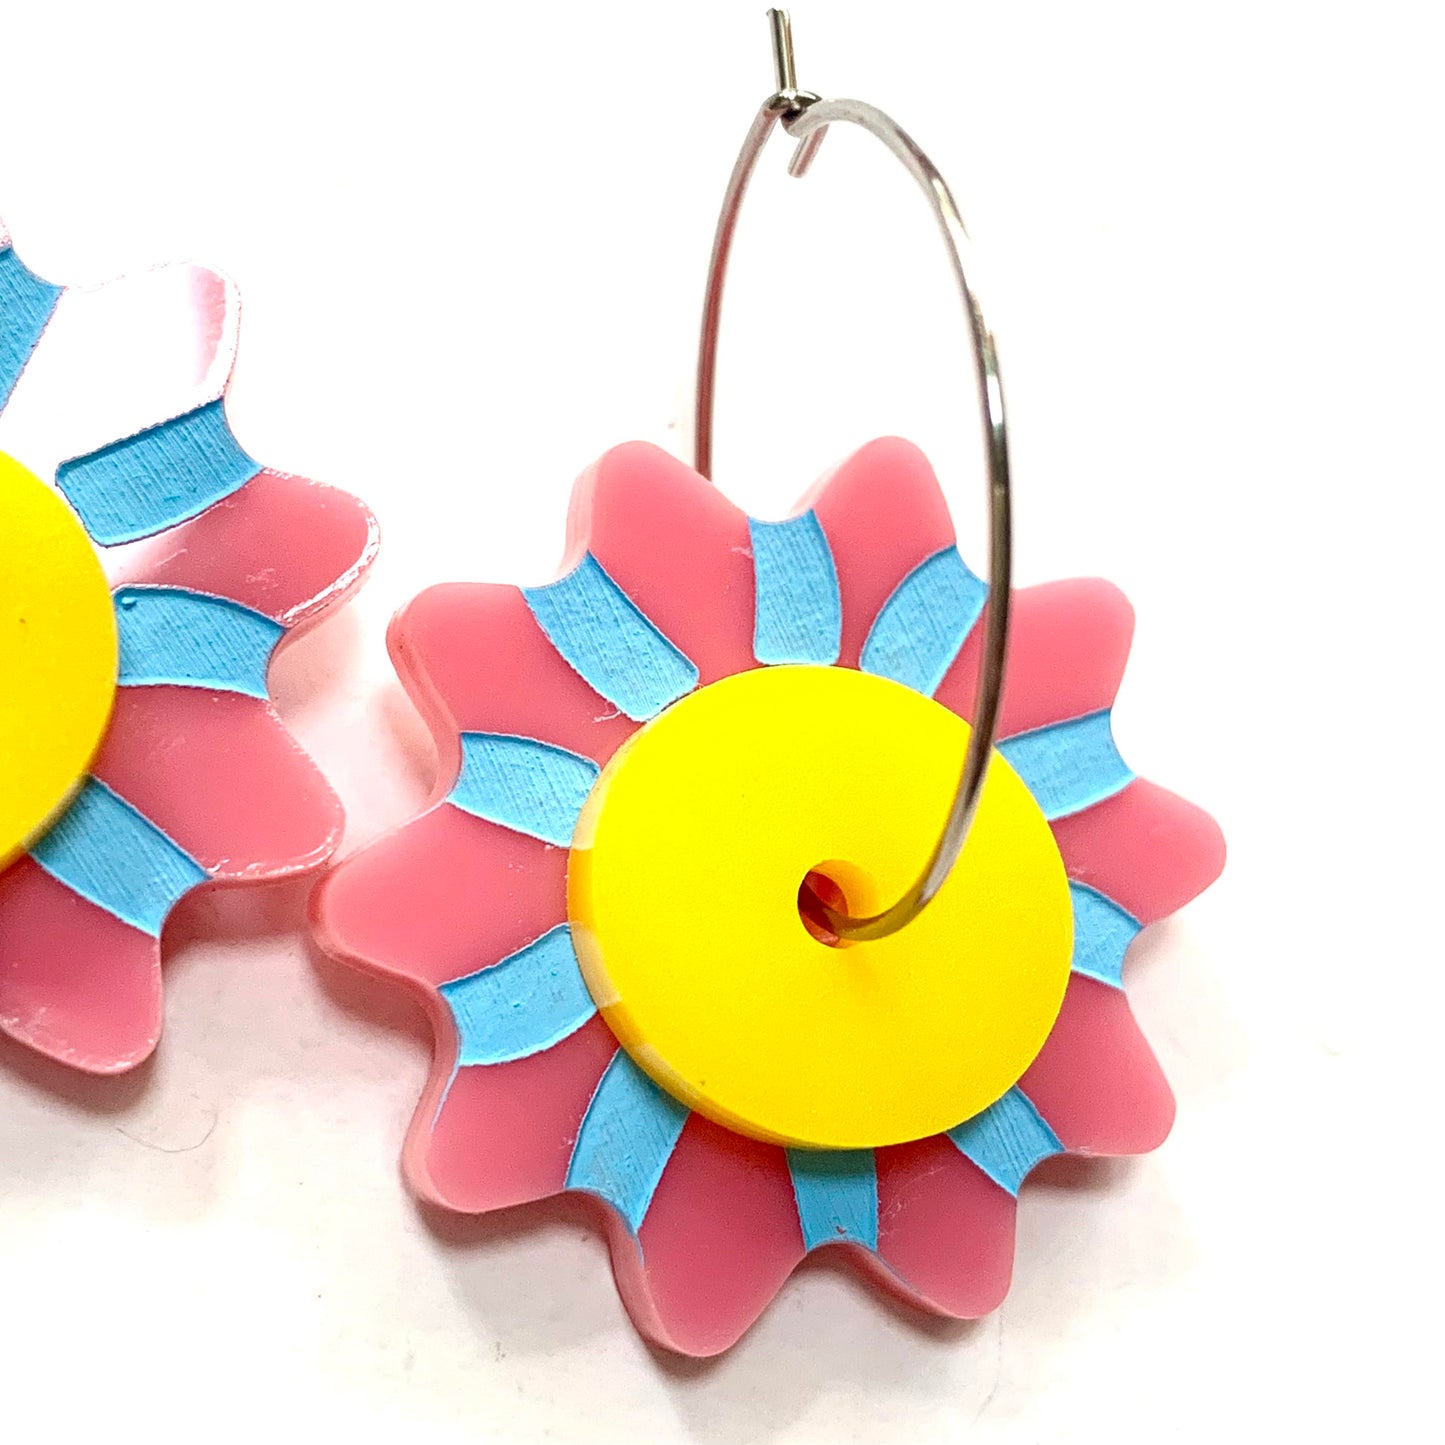 MAKIN' WHOOPEE - "Candy Stripe Blooms" - Hoop Dangles- Piggy Pink & Sunny Yellow